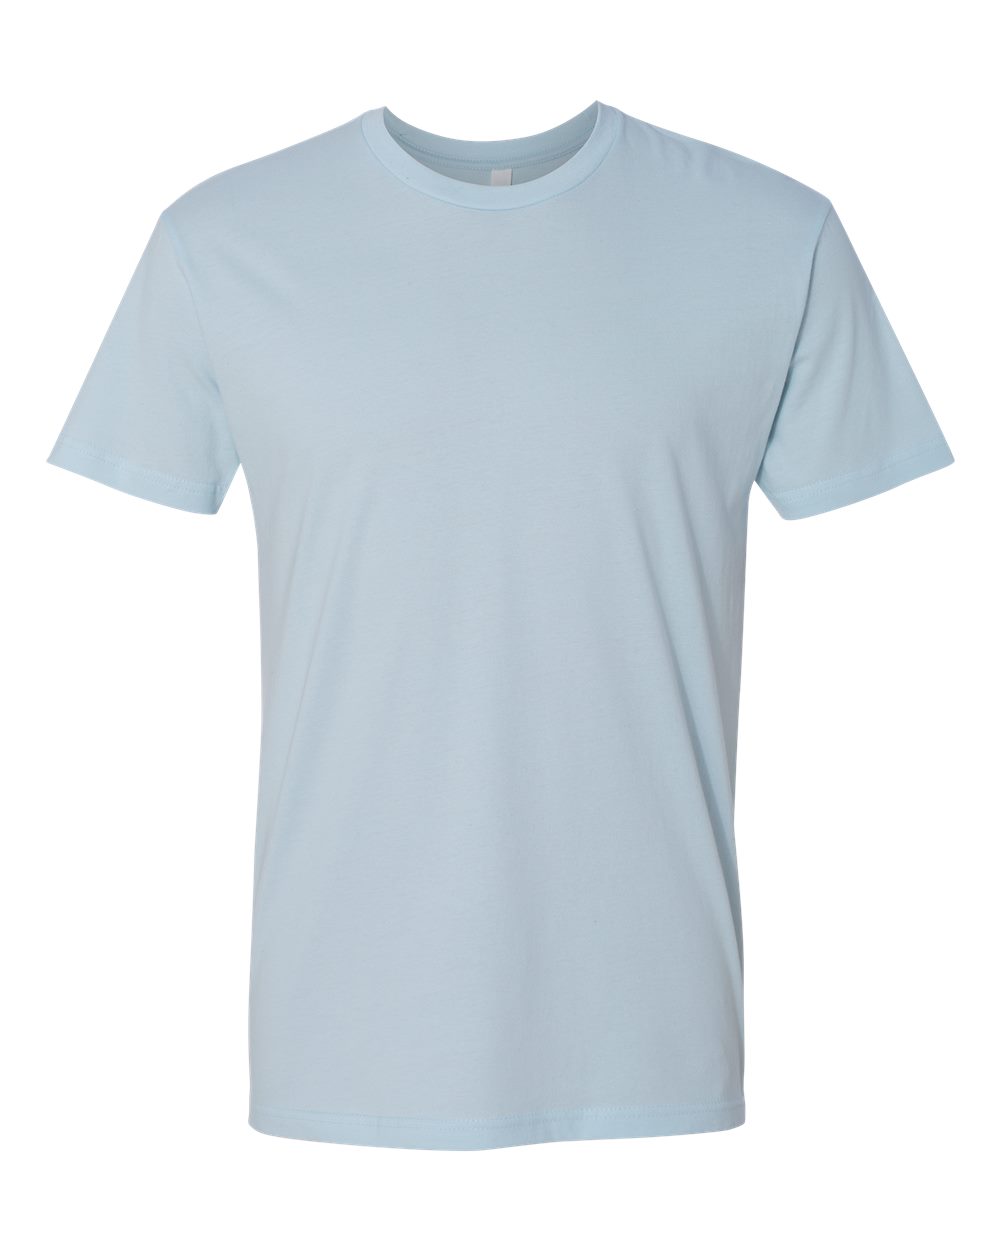 Next Level 3600 - Men's Fitted Short-Sleeve Crew $4.32 - T-Shirts